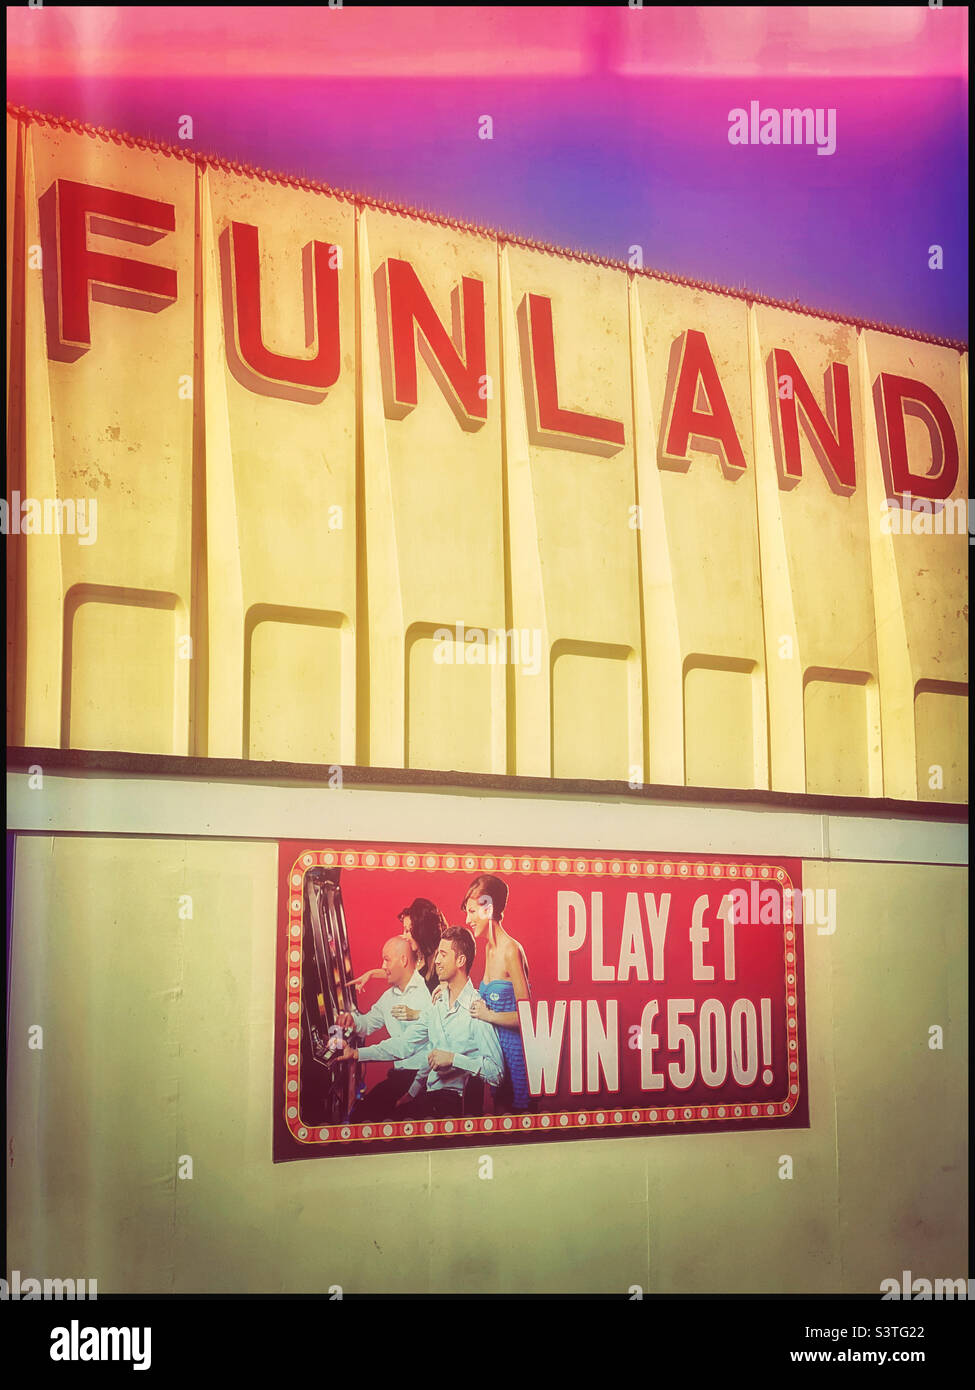 FUNLAND - a retro film effect look of the exterior of an English gambling arcade. Winning money is fun! PLAY £1 and (probably not) WIN £500. Photo Credit ©️ COLIN HOSKINS. Stock Photo